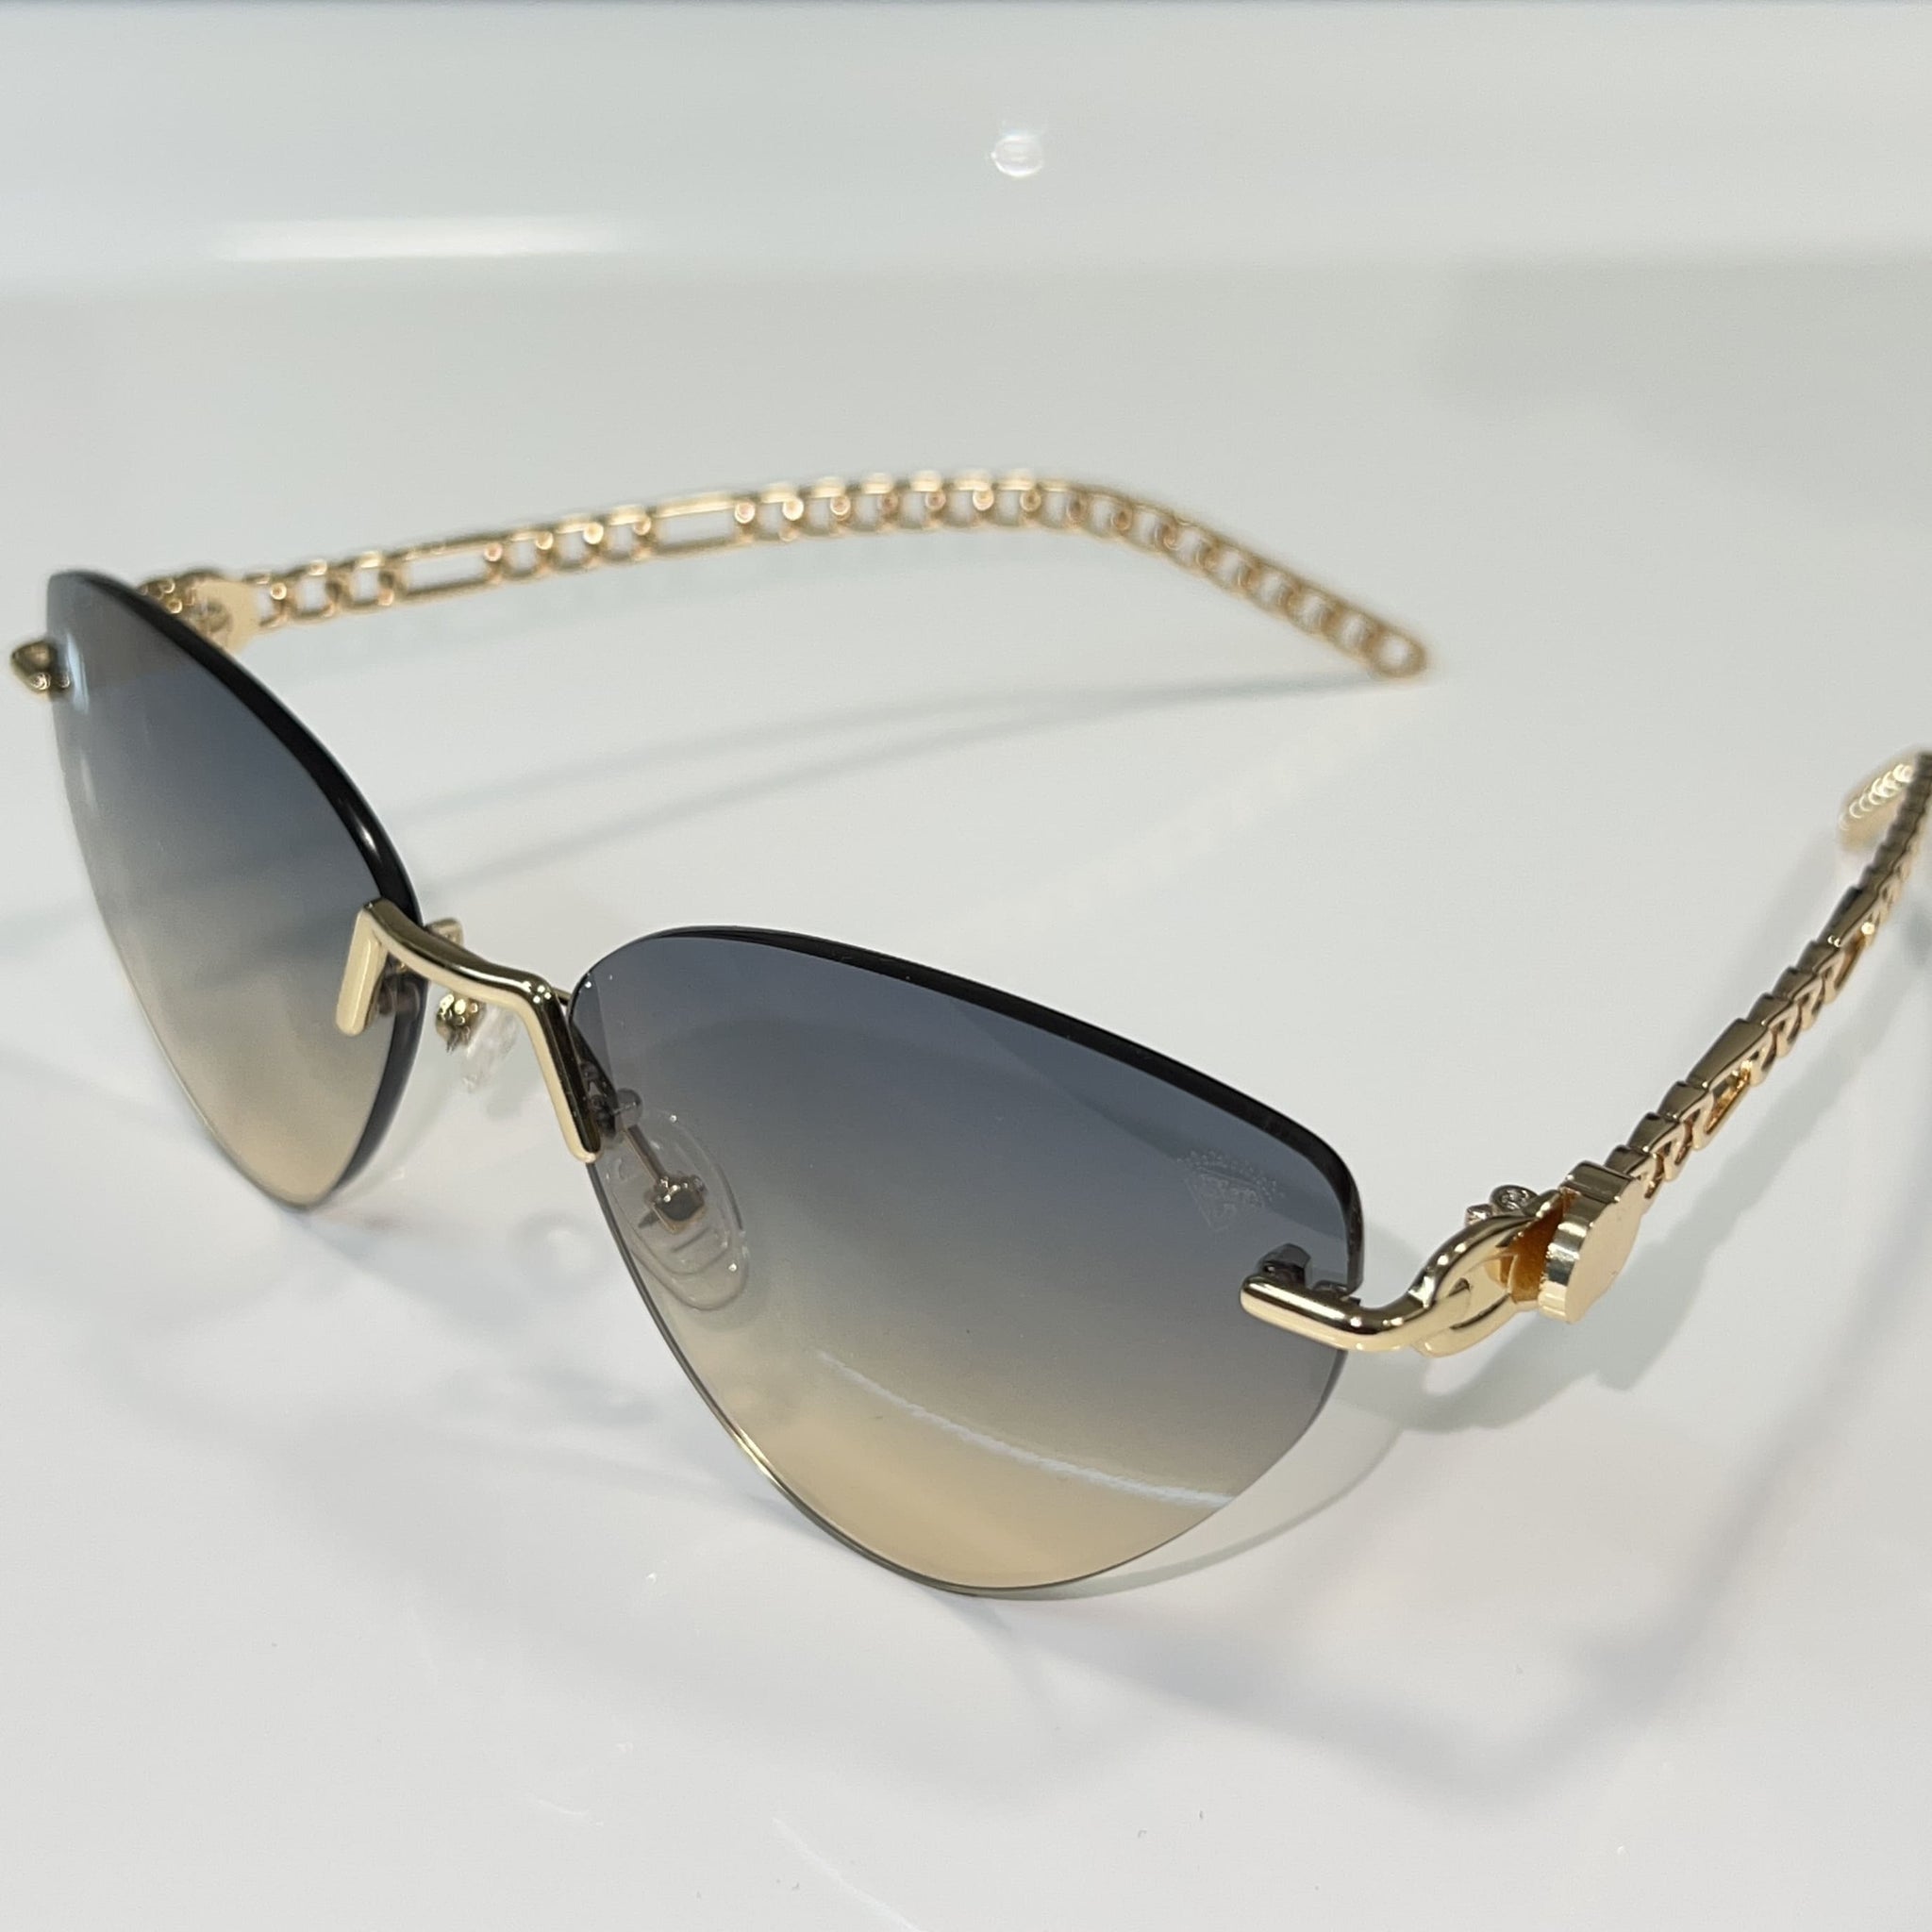 Pearl 'For Her' Glasses - 14k gold plated - Grey/Creme Shade - Sehgal Glasses